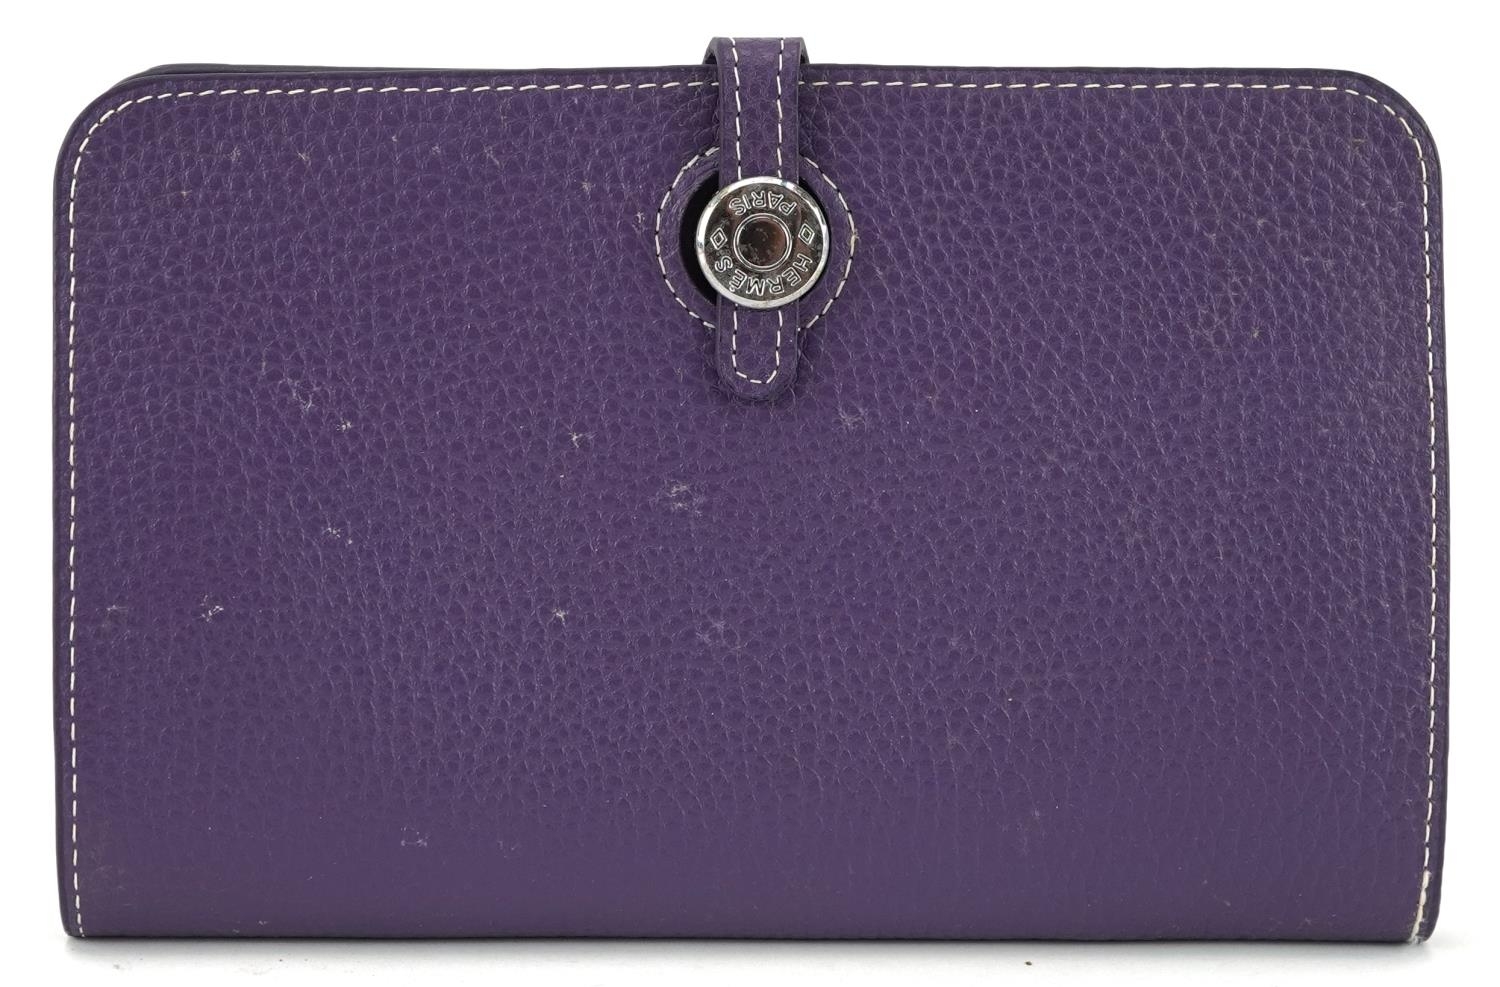 Hermes, French purple leather clutch purse with cardholder, dust bag and box, the clutch bag 19. - Image 3 of 6